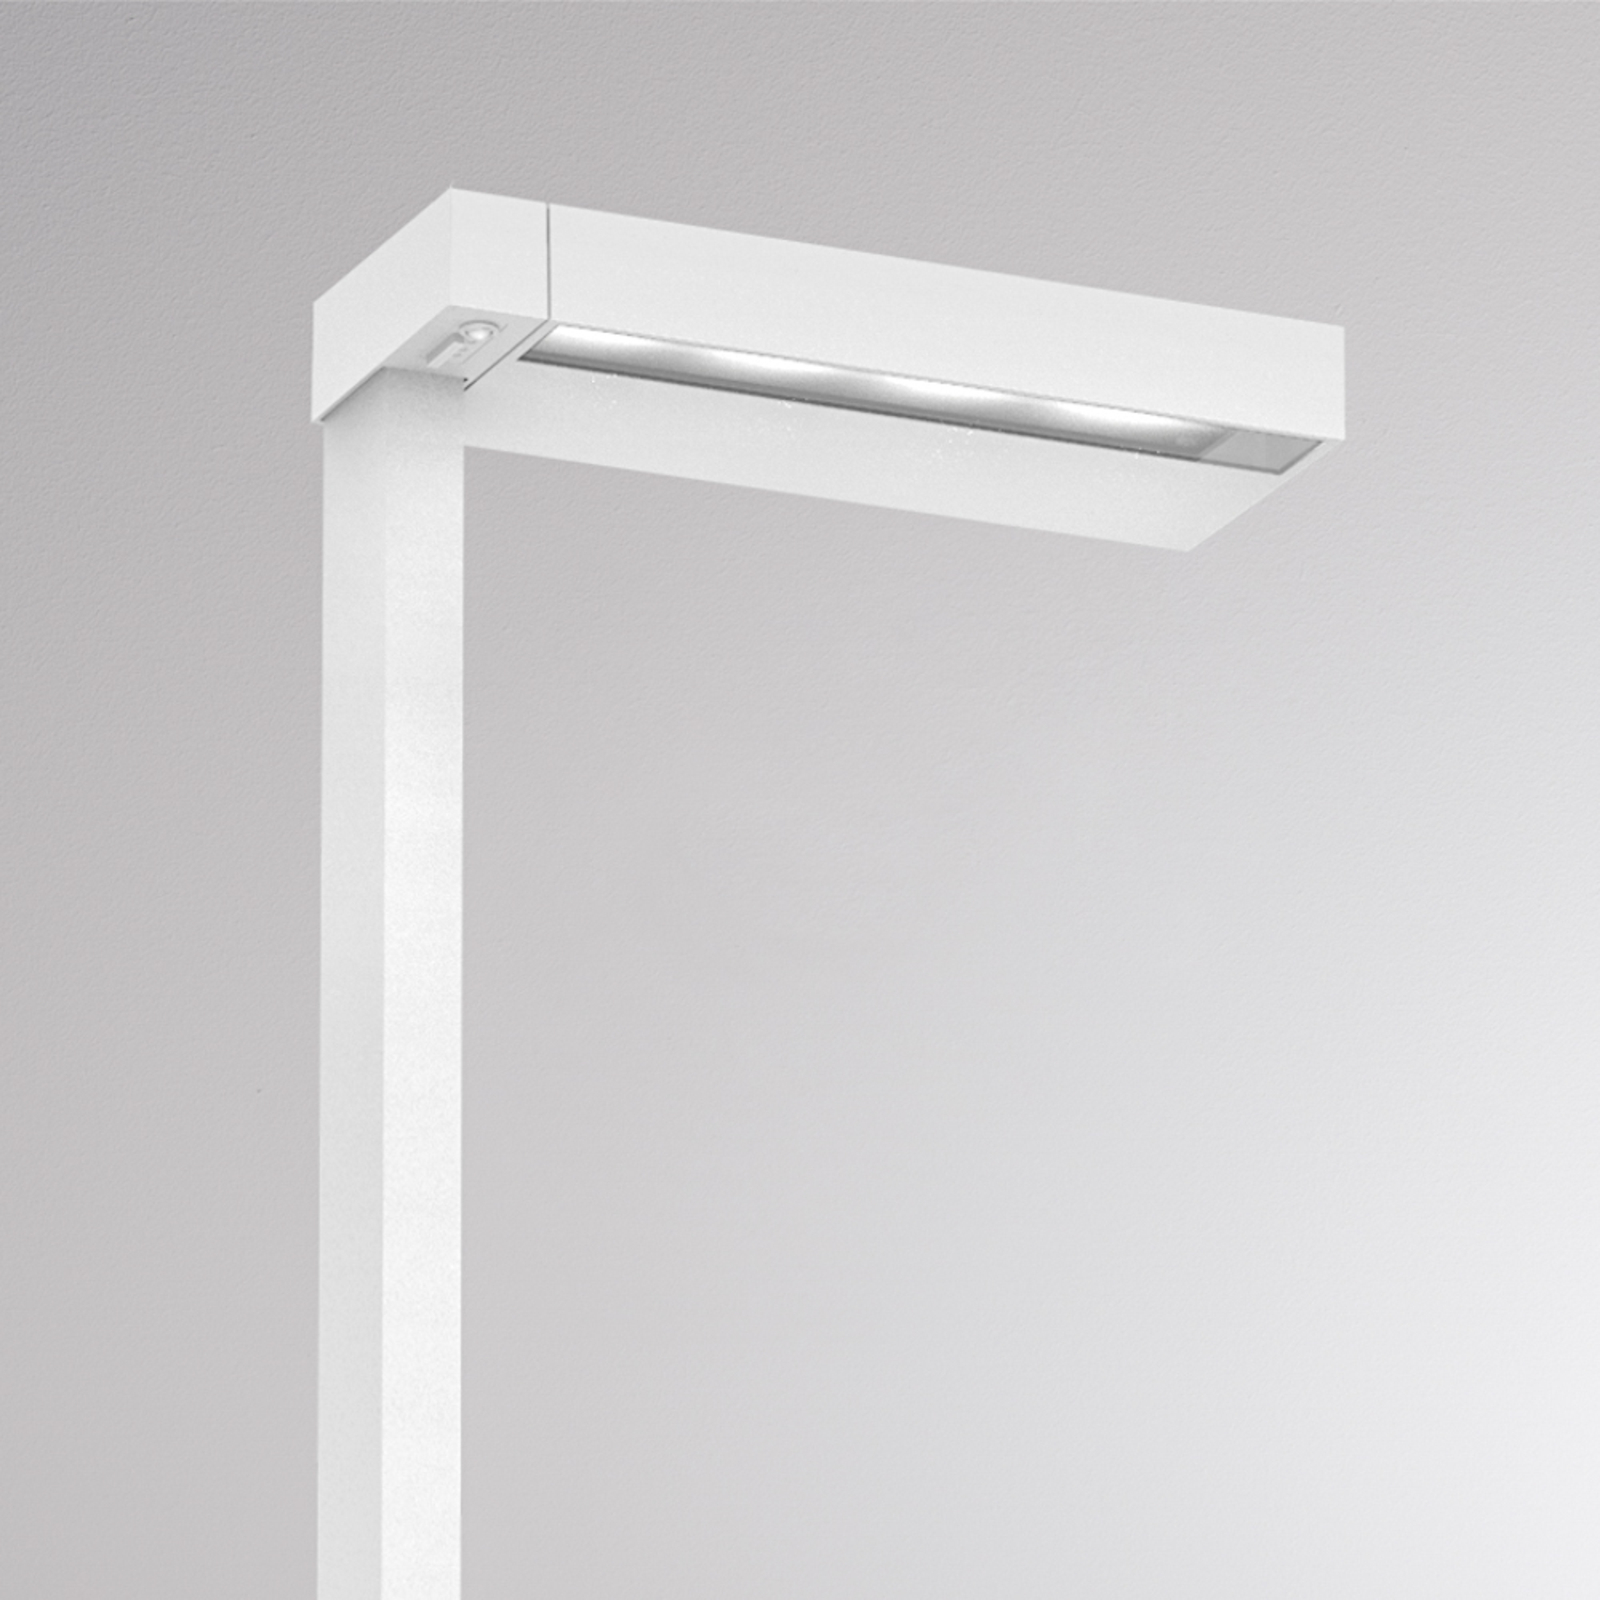 Molto Luce Concept Right F Stehlampe Sensor weiß